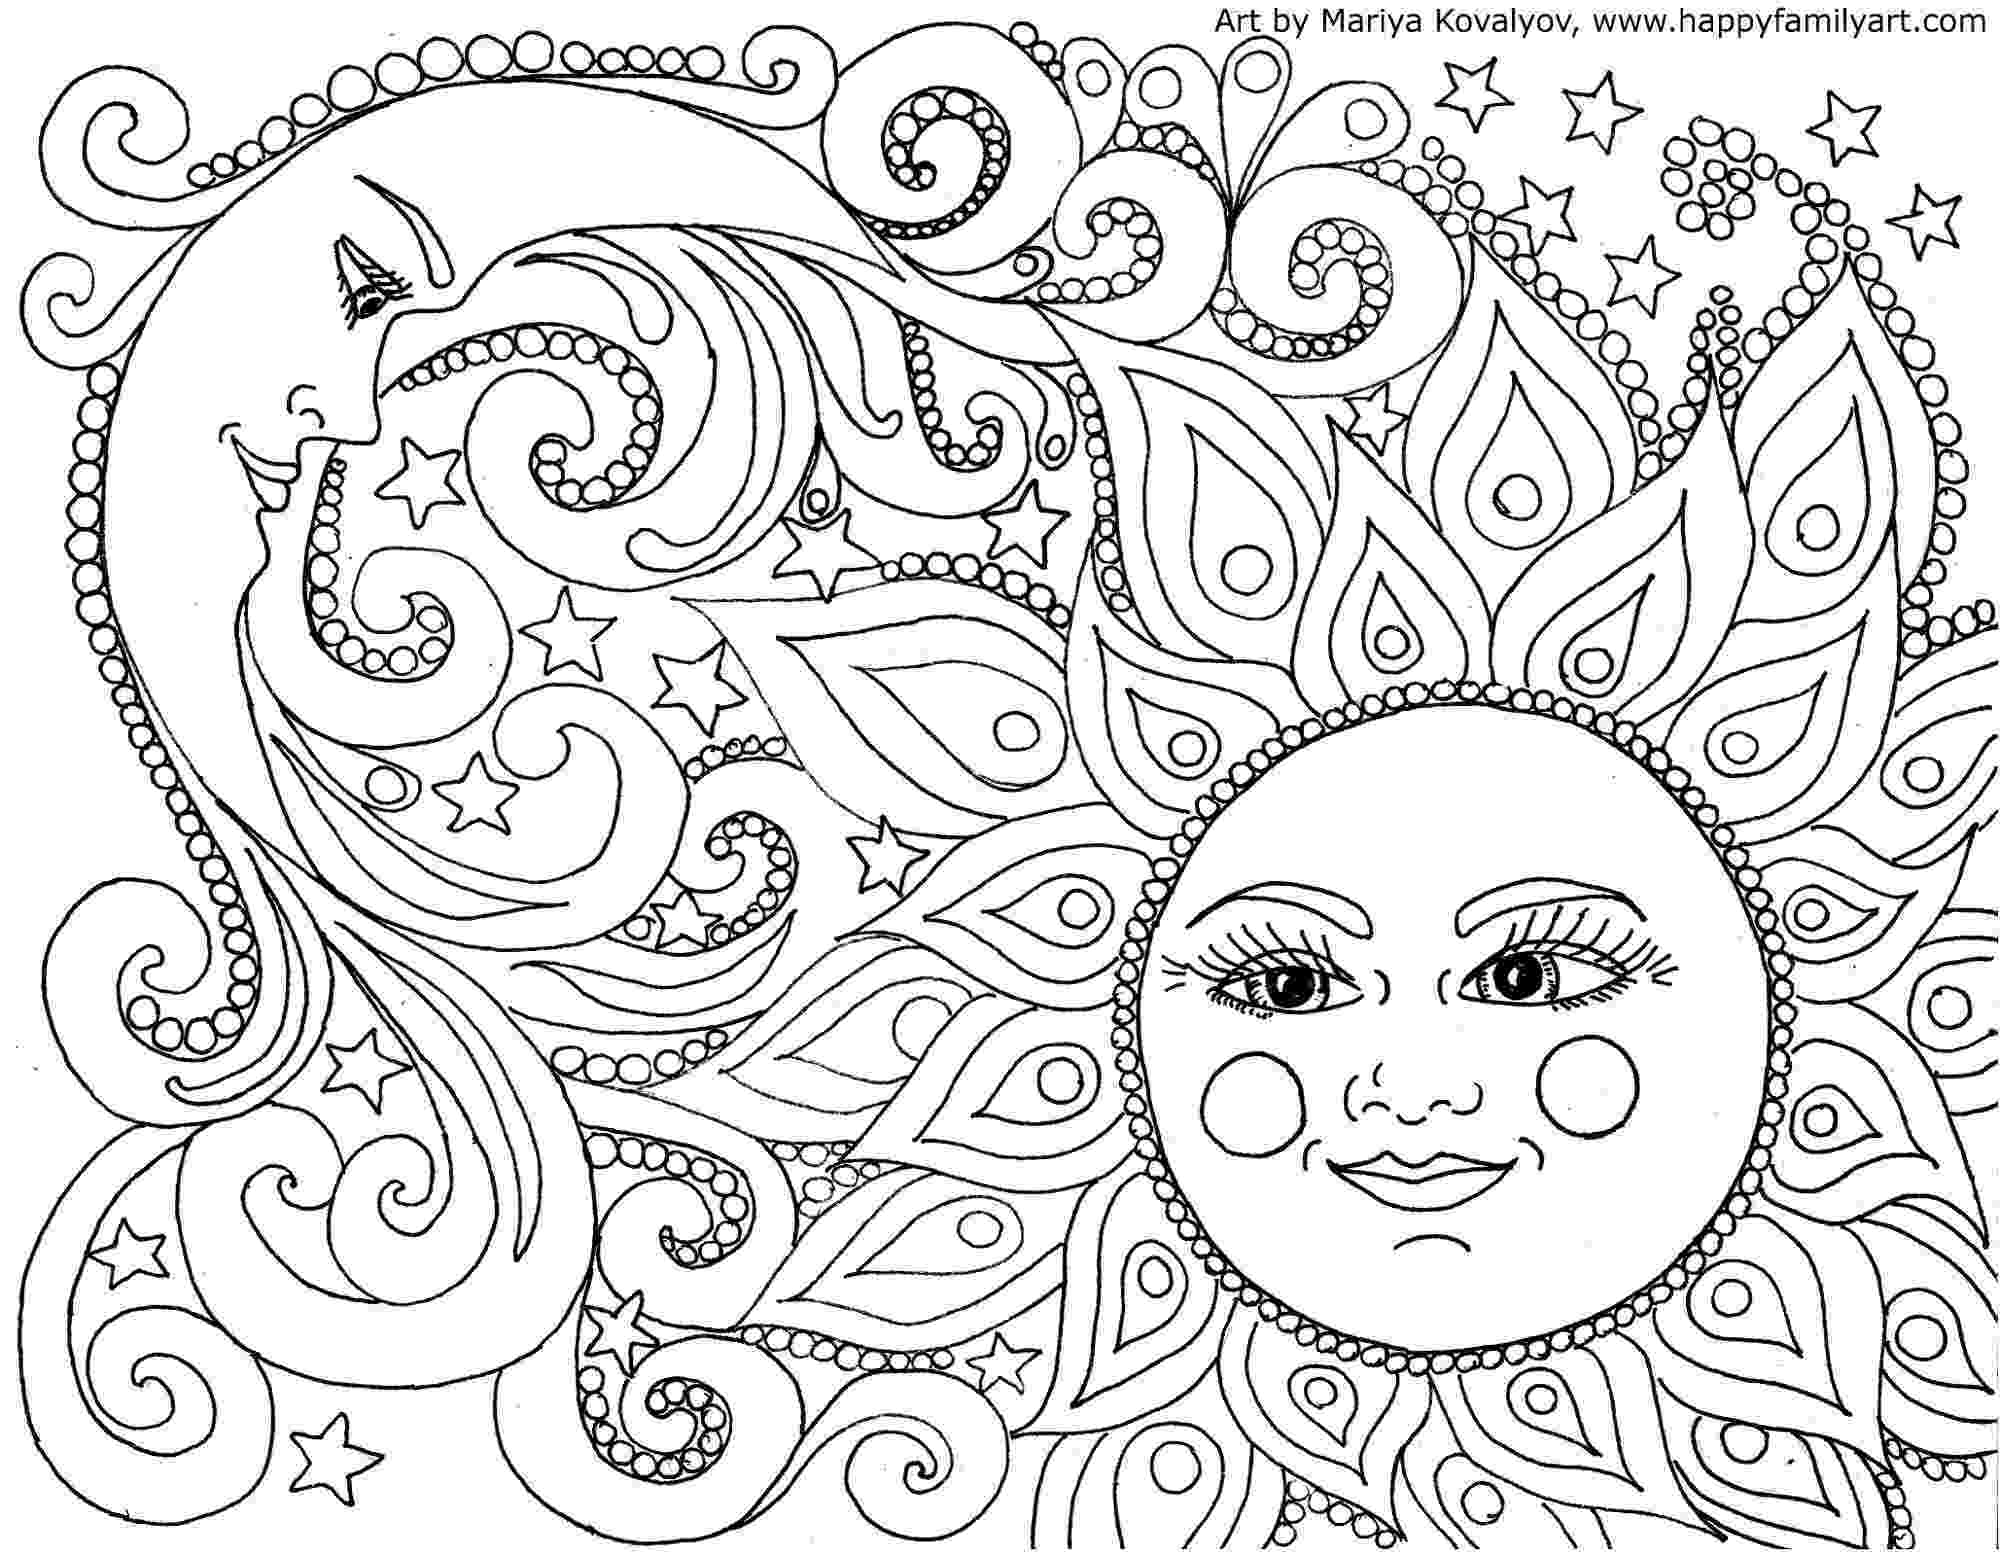 funny coloring pages for adults pin by colette banks on essence of ink adult coloring funny coloring pages for adults 